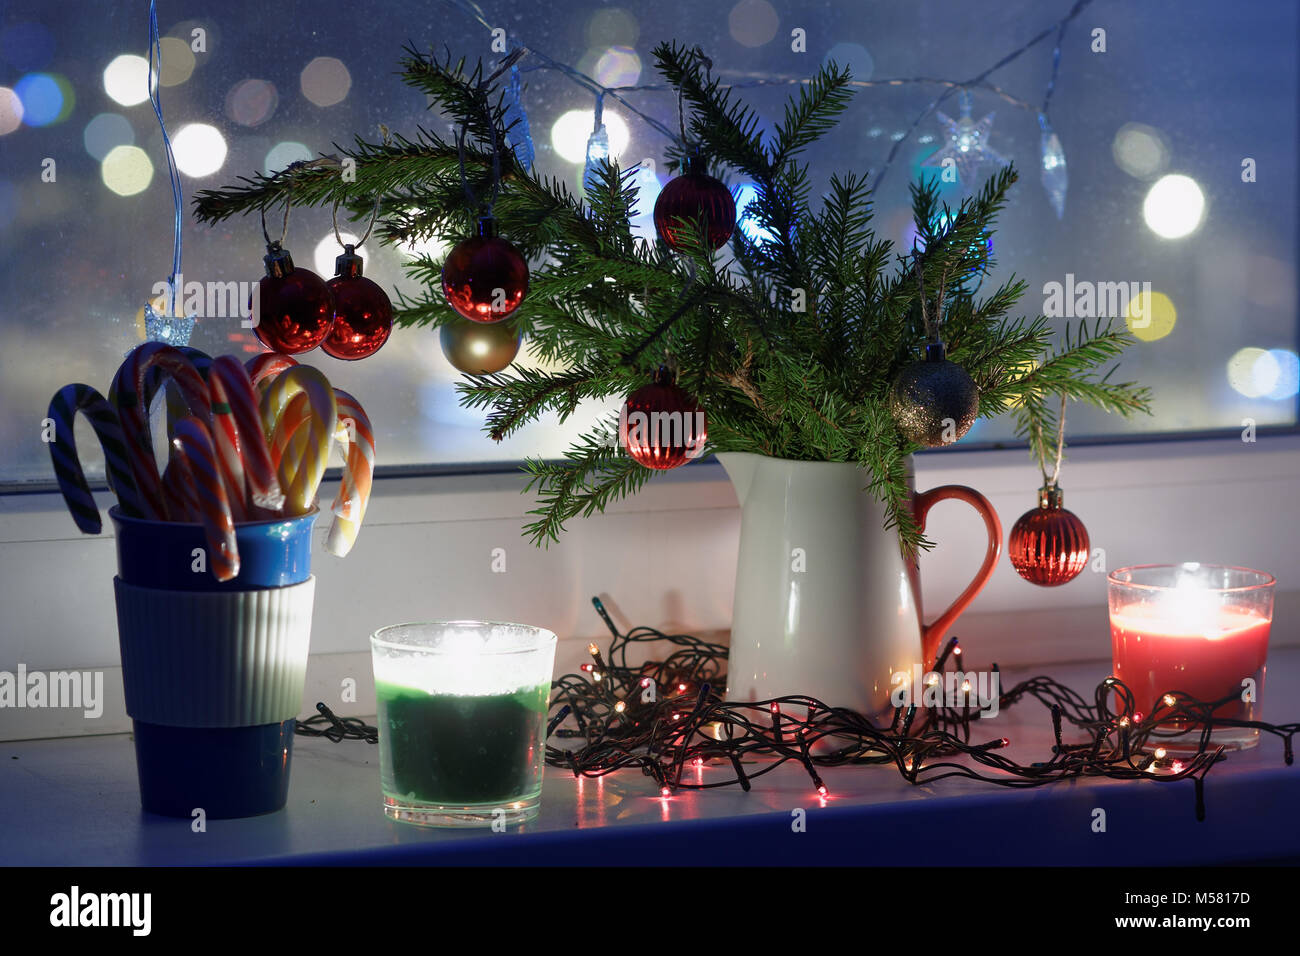 Christmas decorations and candles on a window sill Stock Photo